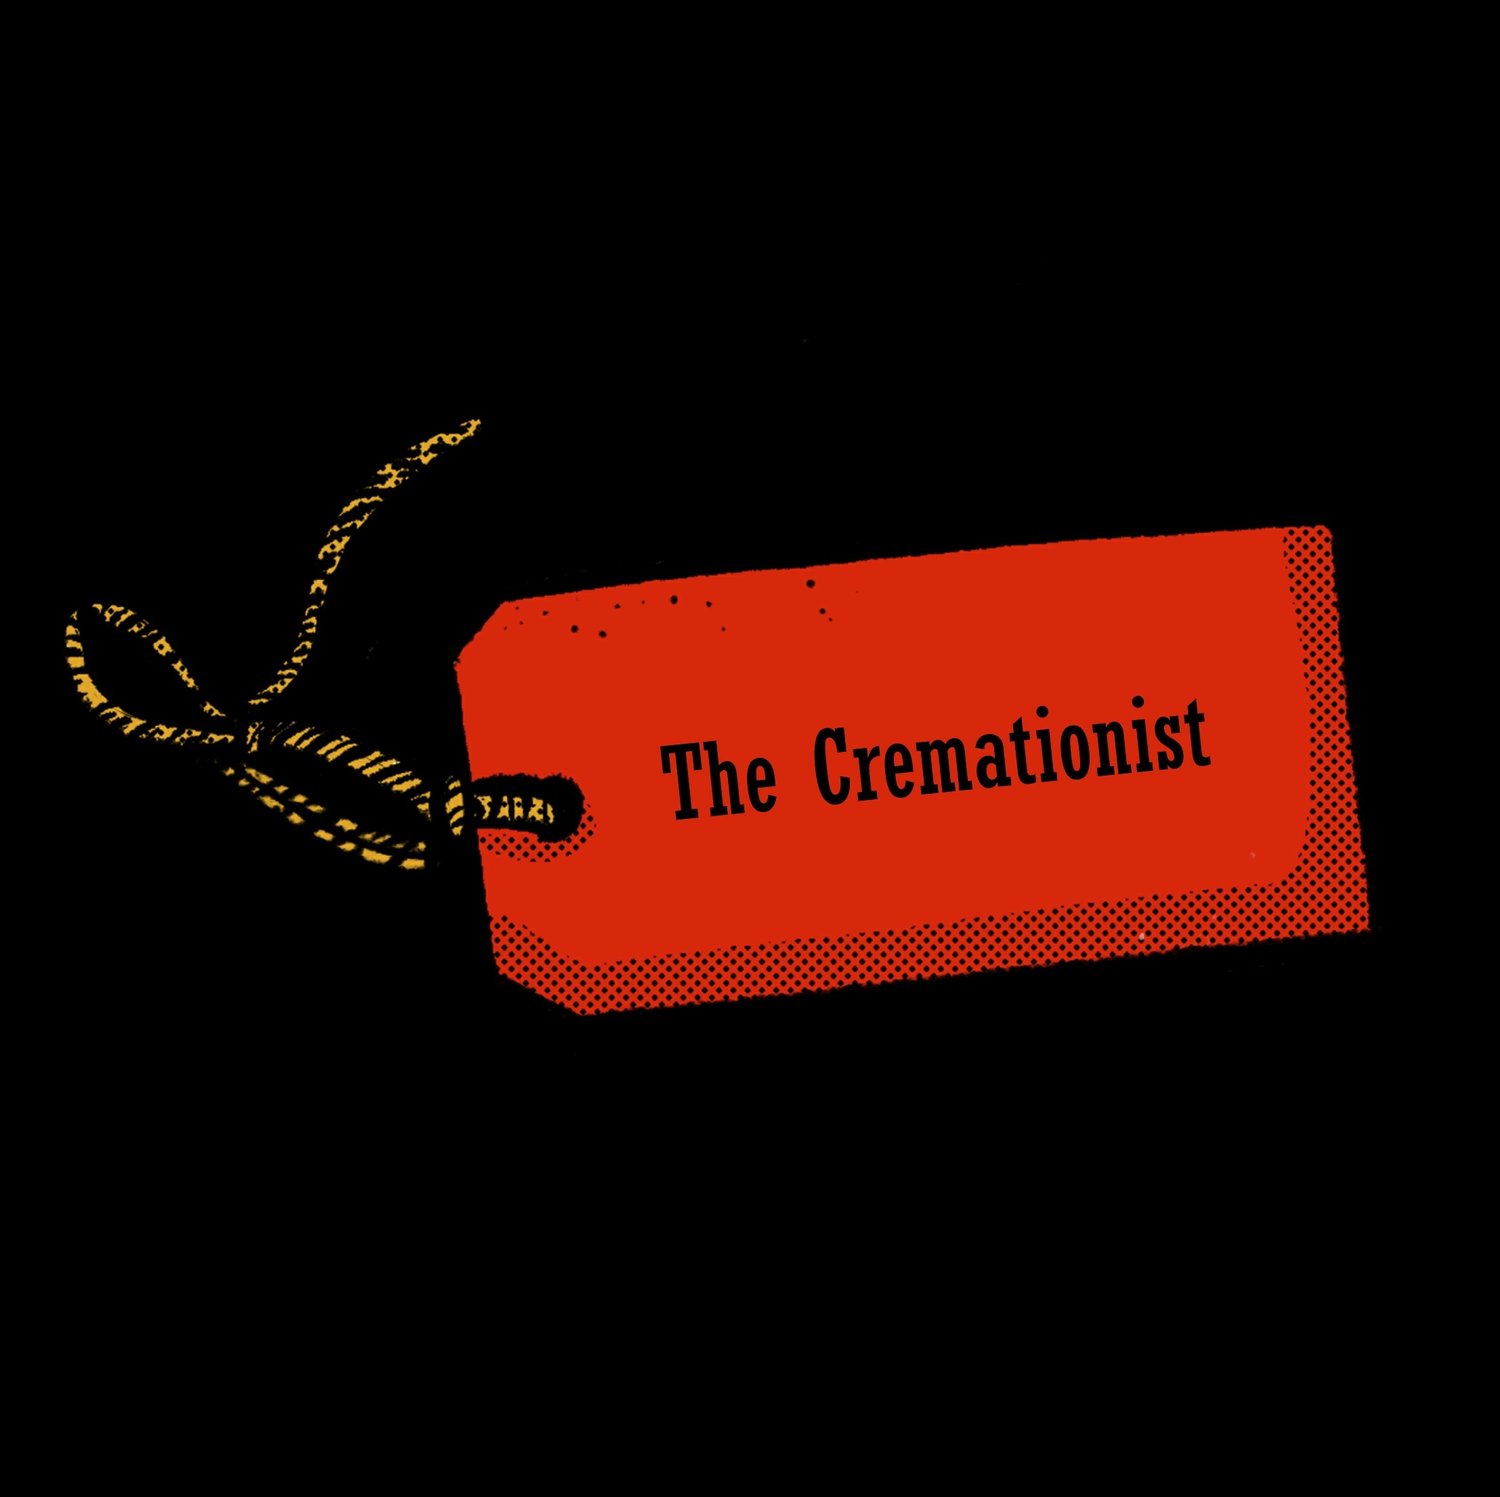 Episode 16: The Cremationist